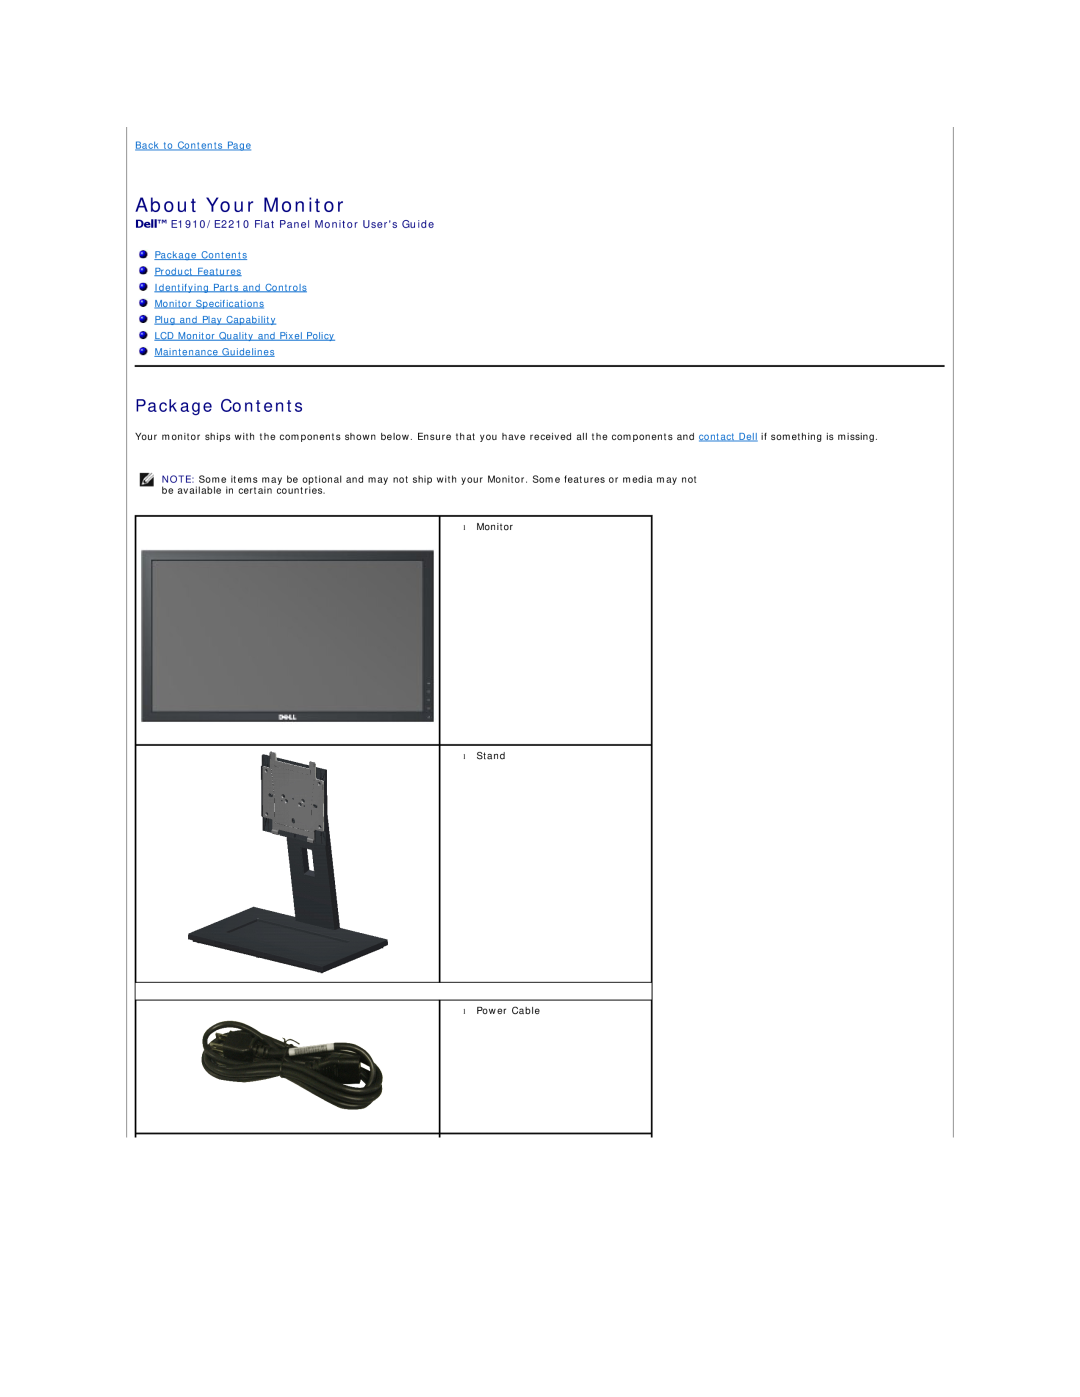 Dell About Your Monitor, Package Contents, Dell E1910/E2210 Flat Panel Monitor Users Guide, Back to Contents Page 